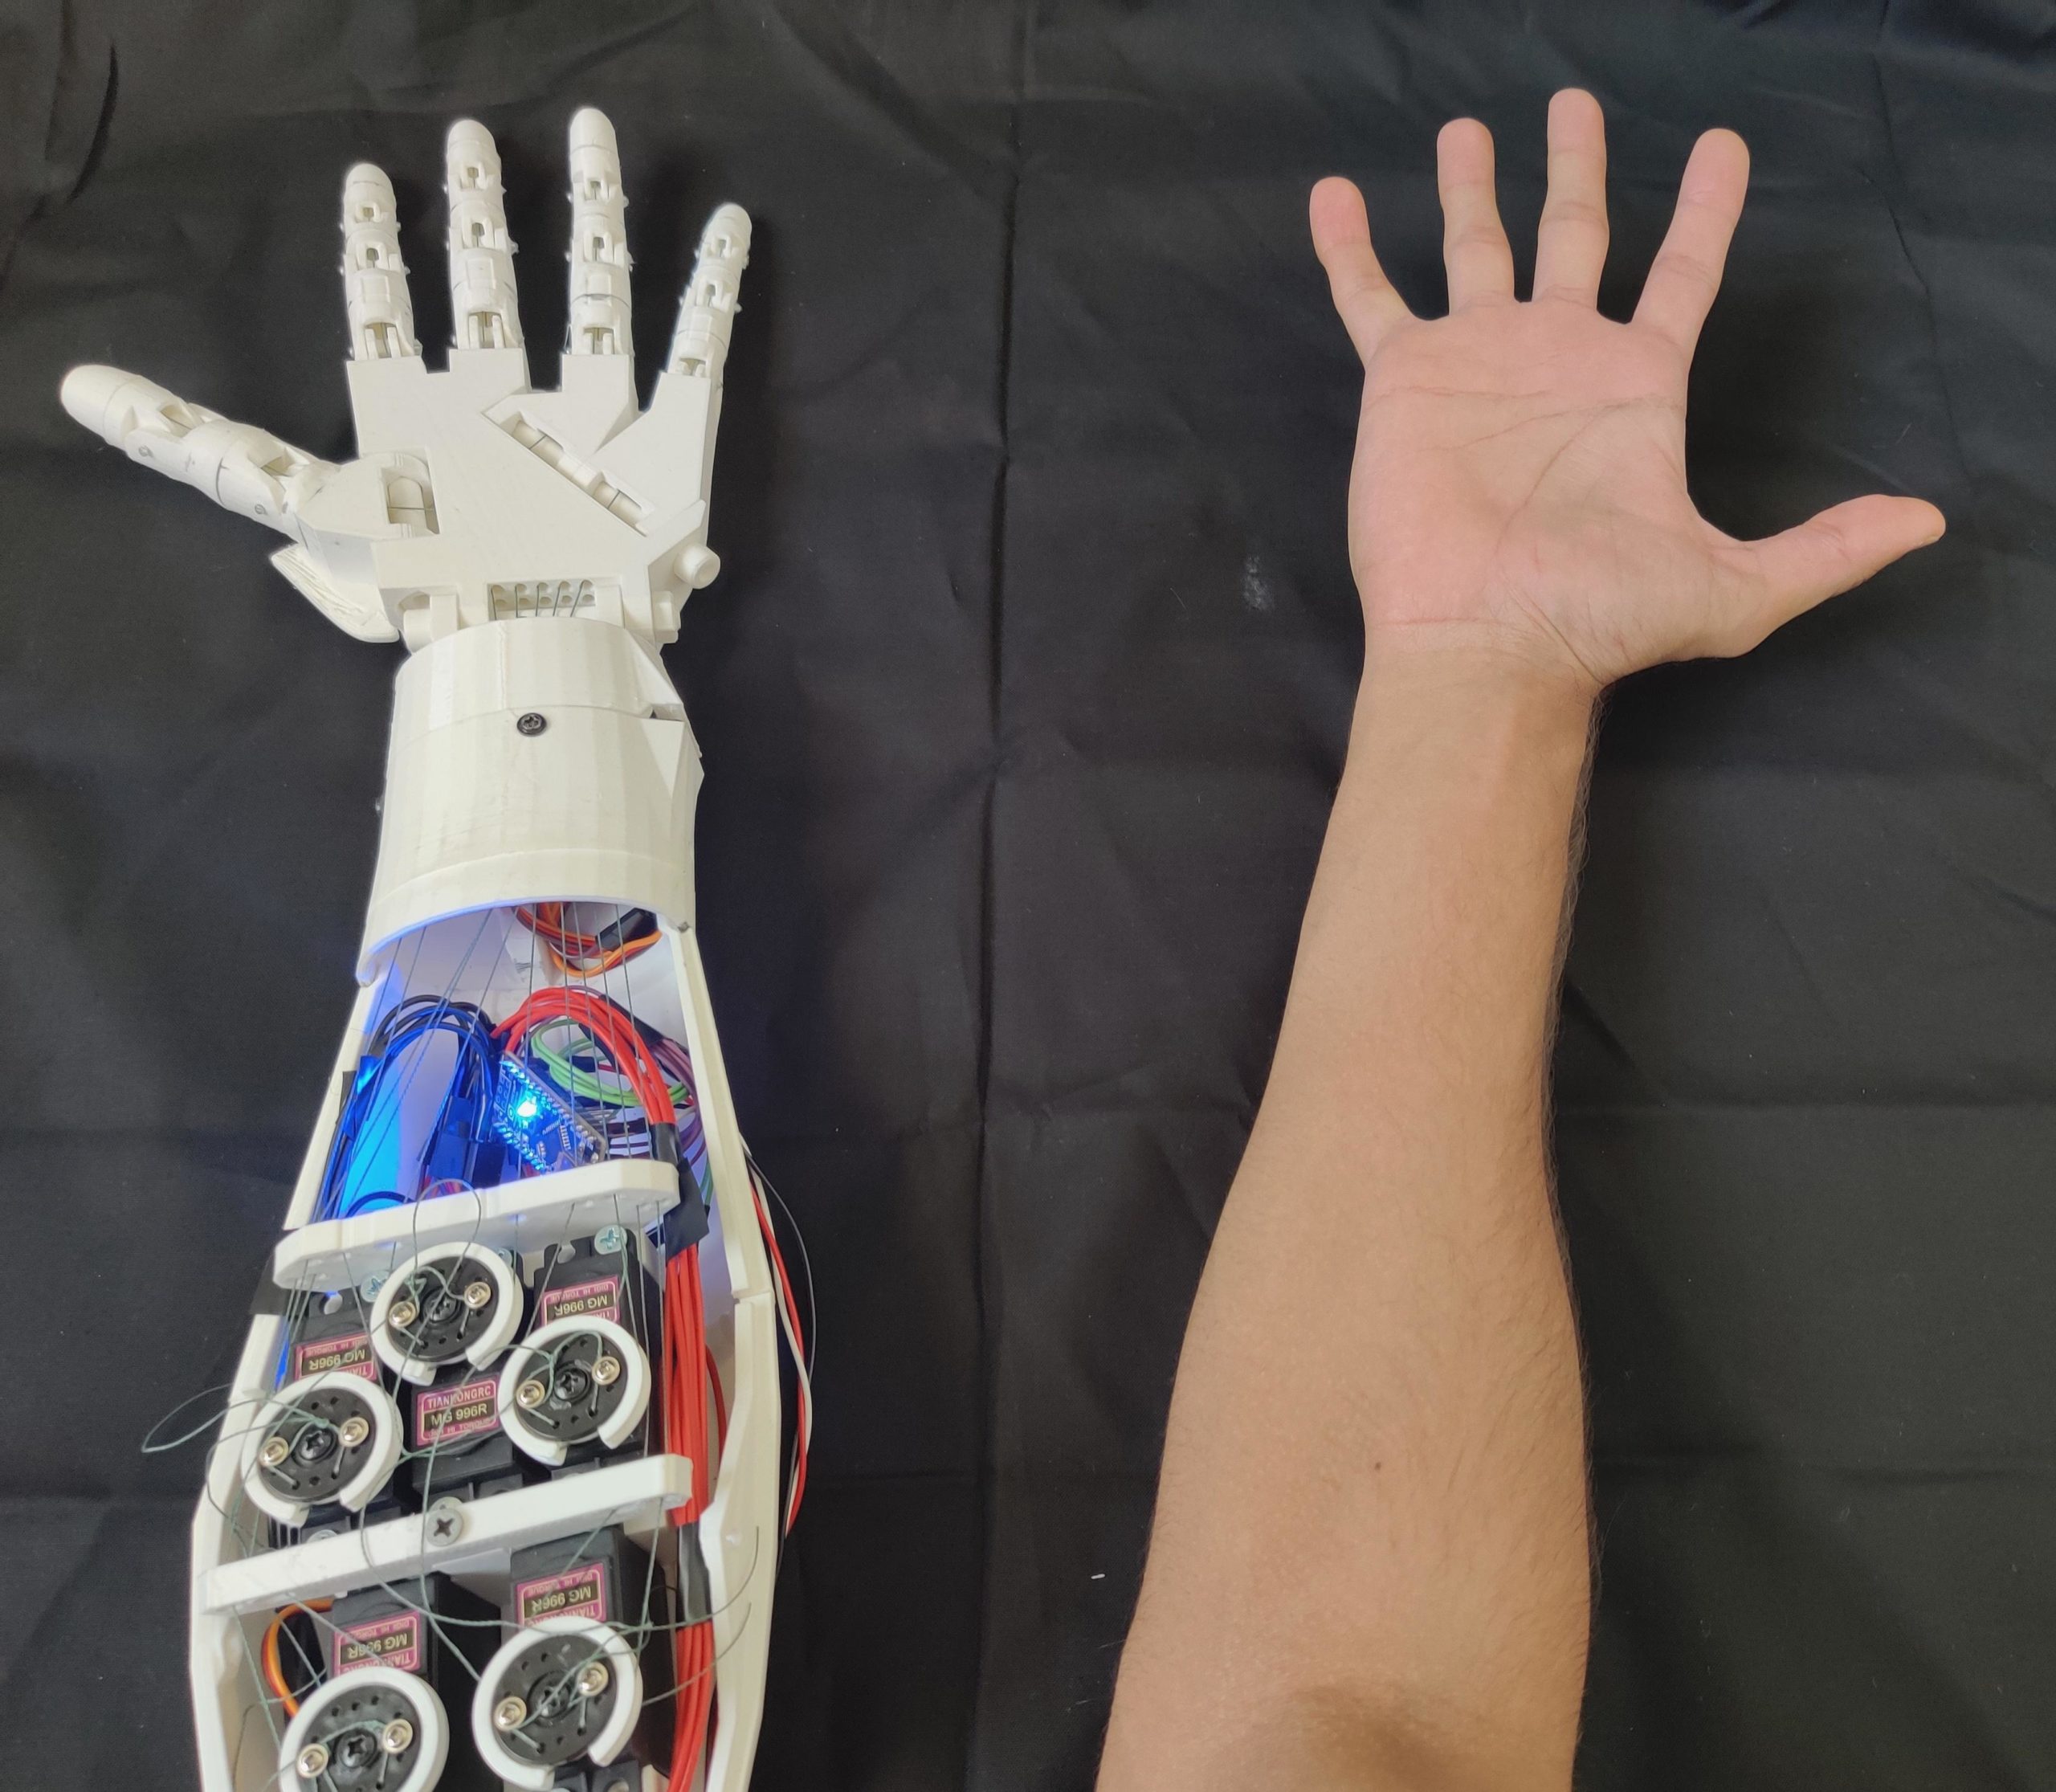 Design of a 3D-printed EMG bionic hand as a low-cost alternative to prosthetic limbs